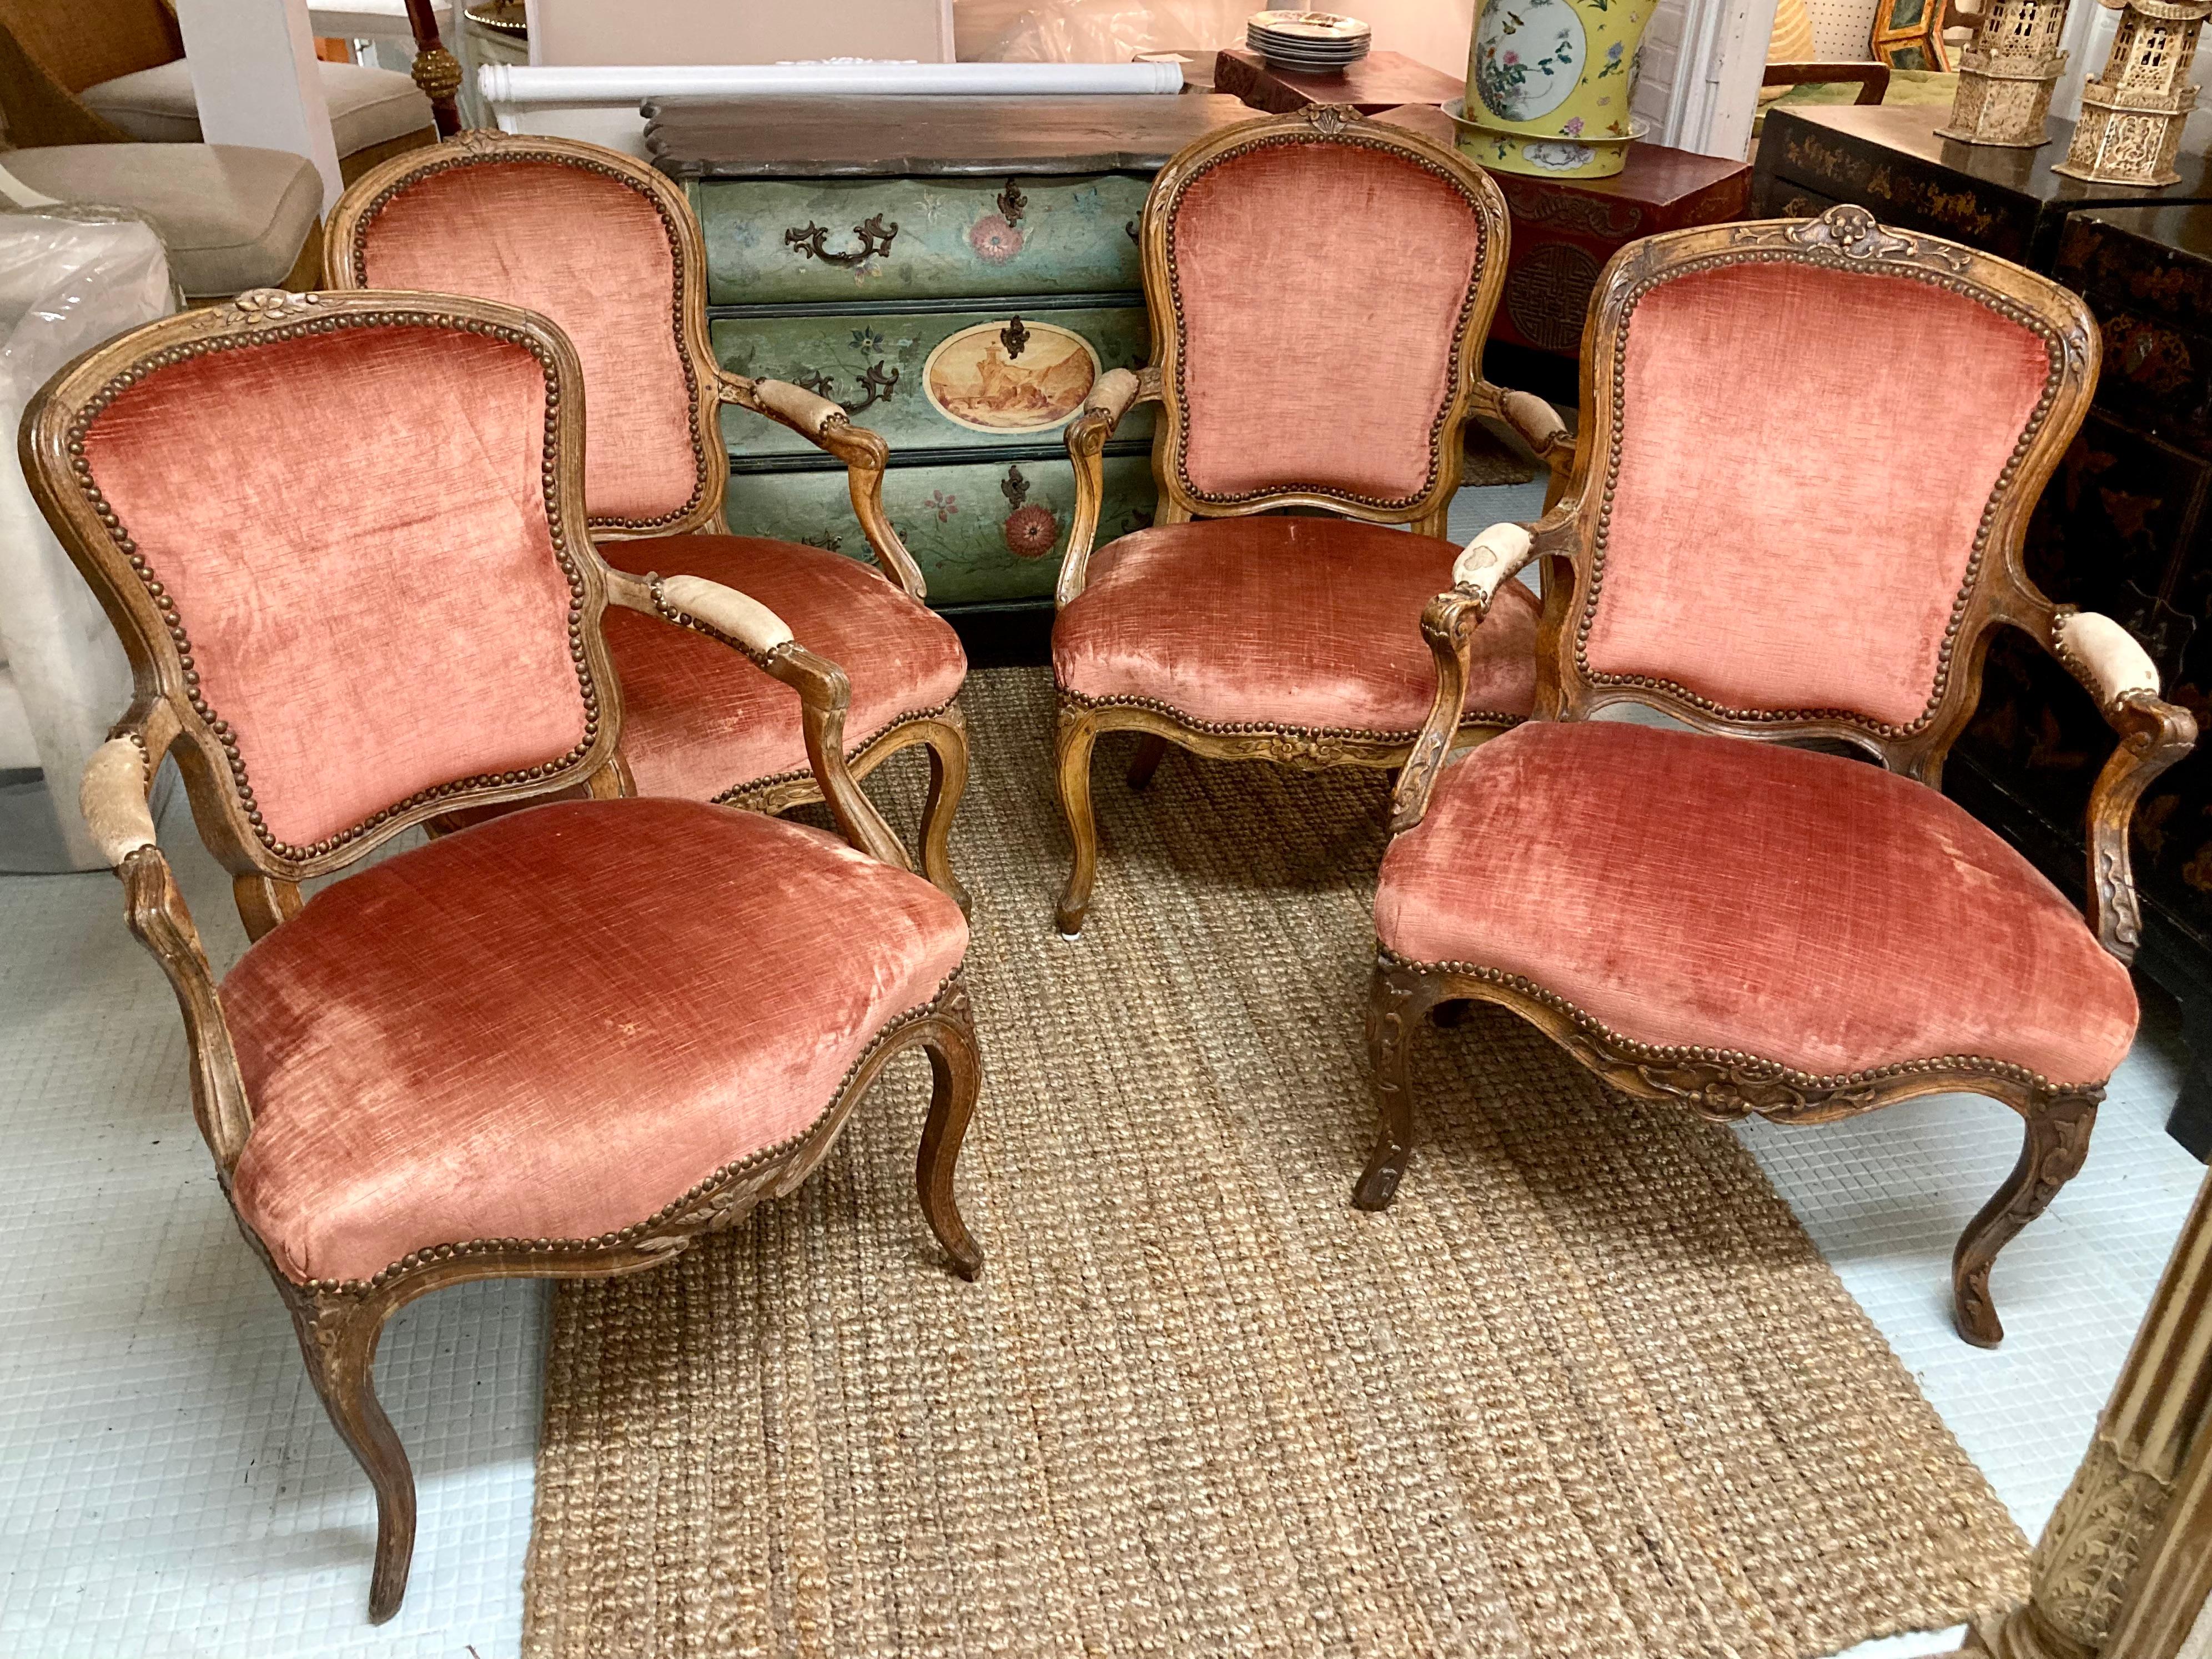 Beautiful set of 4, 18th Century French Louis XV fauteuil chairs each with unique carvings but same dimensions. Look closely at the photos showing different carving details and elements but they are all the same dimensions. Fun, beautiful grouping